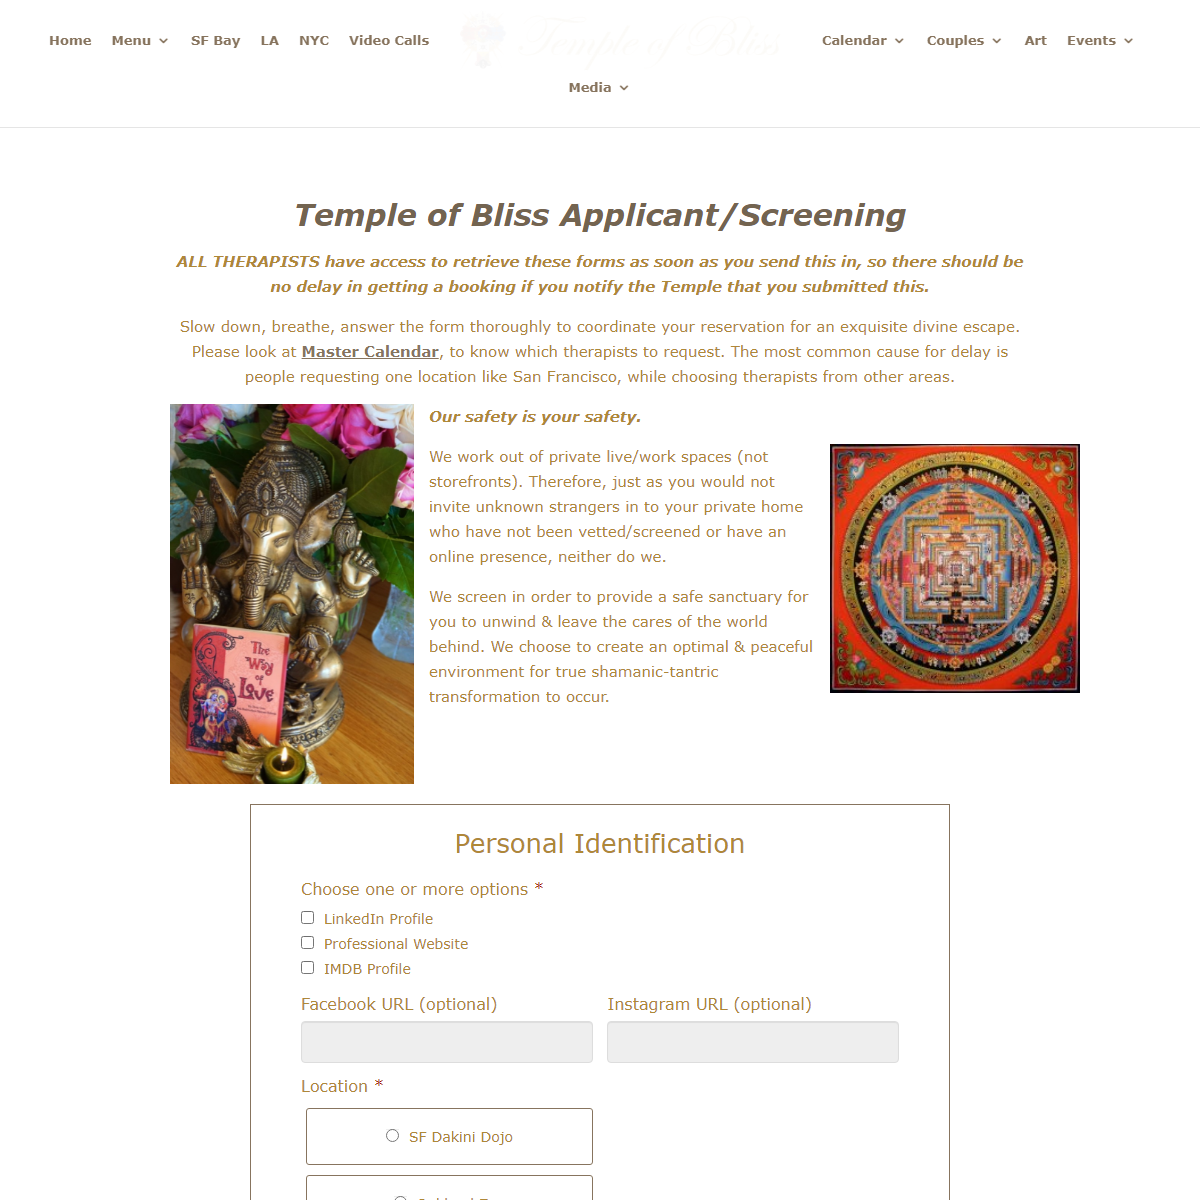 A complete backup of https://templeofbliss.com/new-client-form/